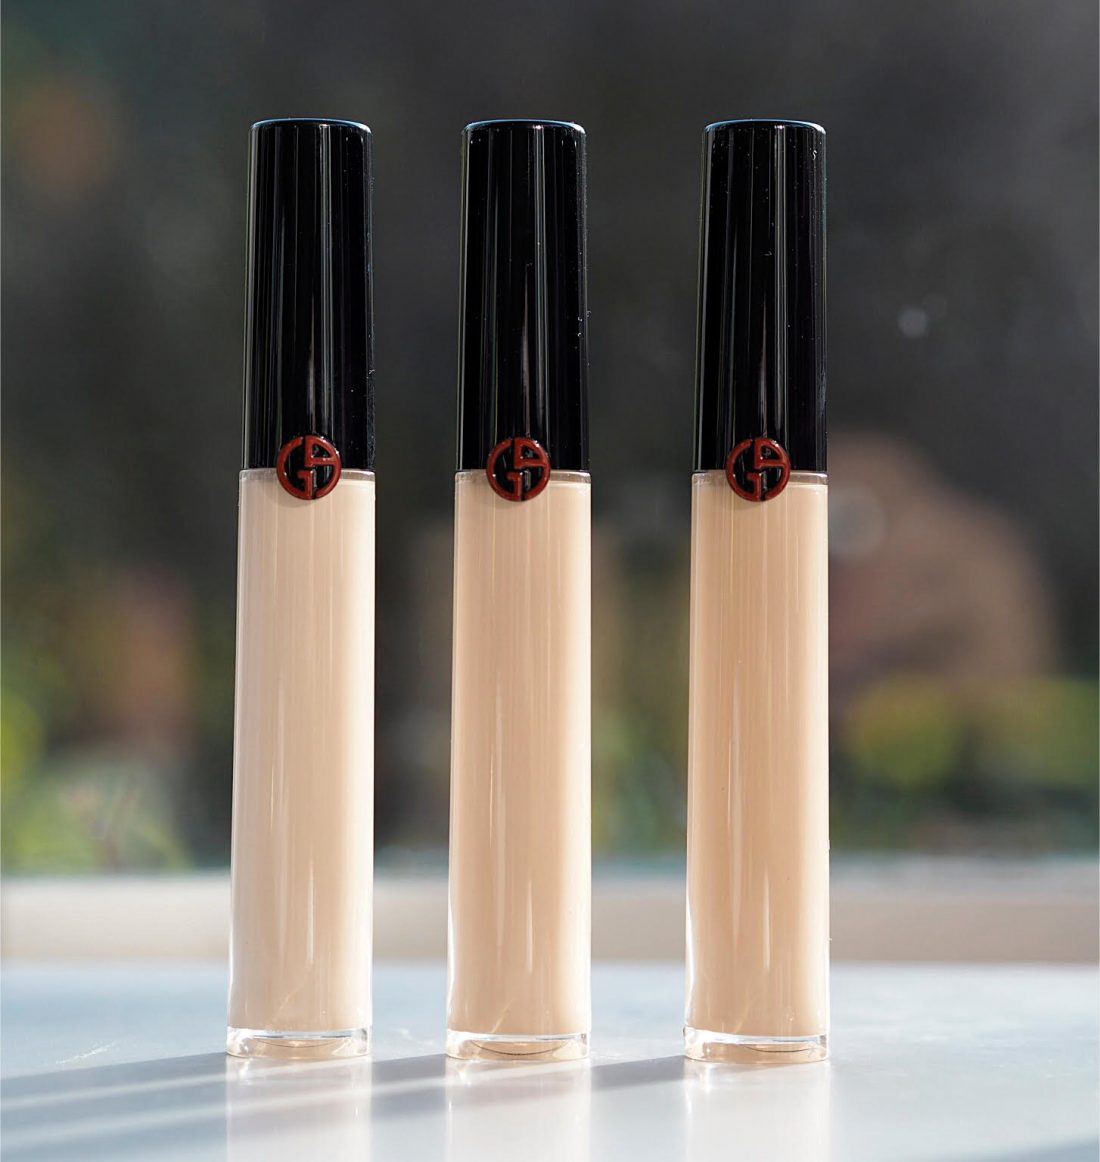 armani fabric concealer swatches